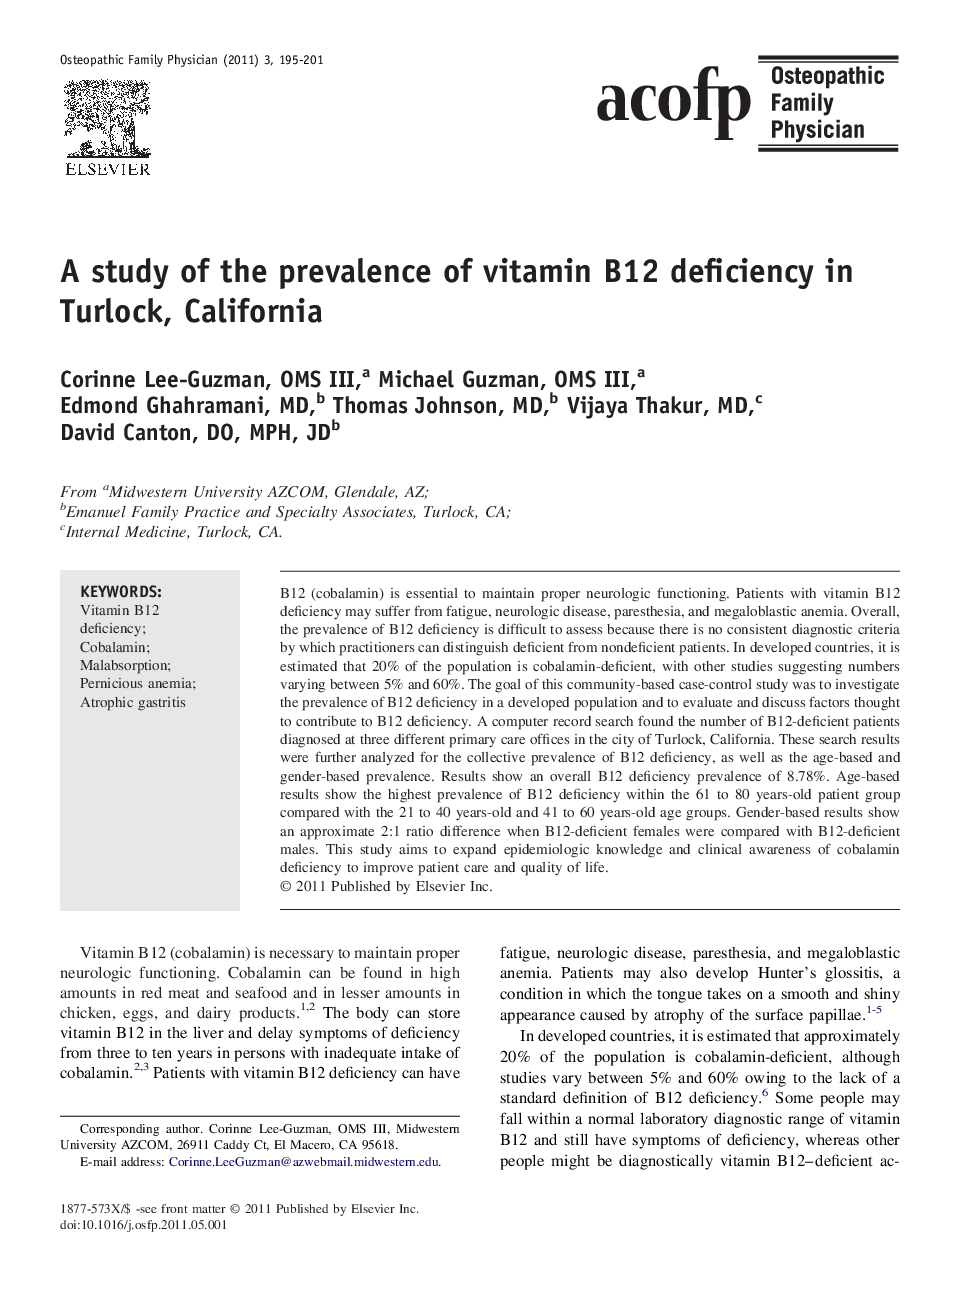 A study of the prevalence of vitamin B12 deficiency in Turlock, California